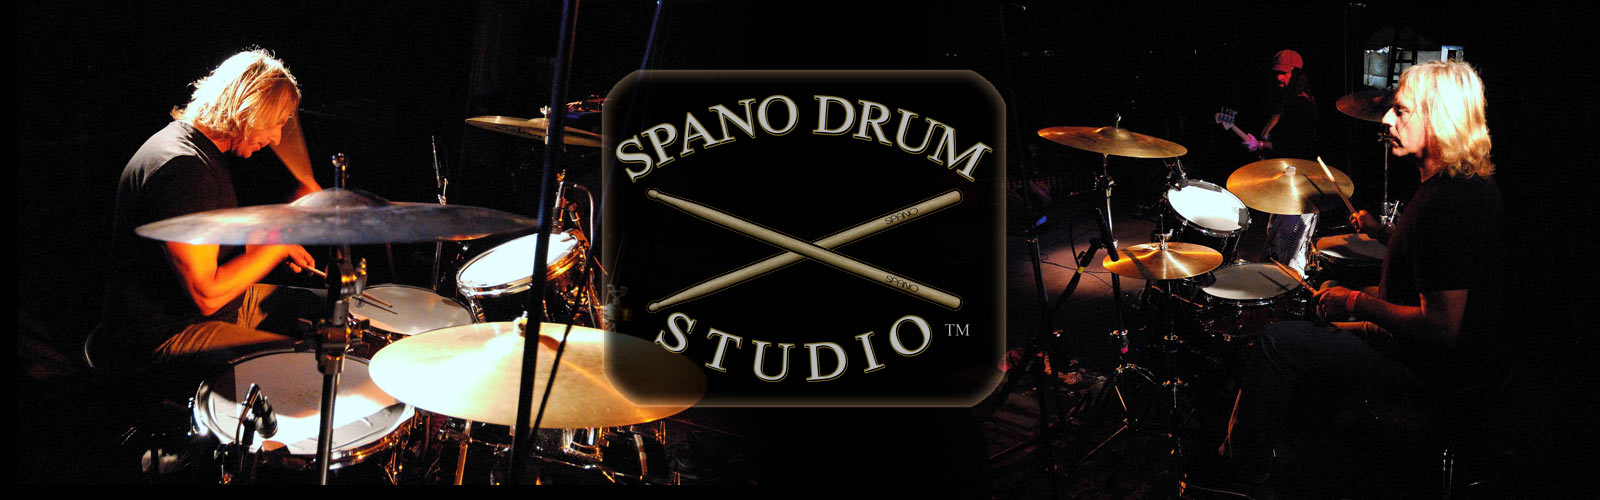 Rick Spano - Seattle Drum Lessons